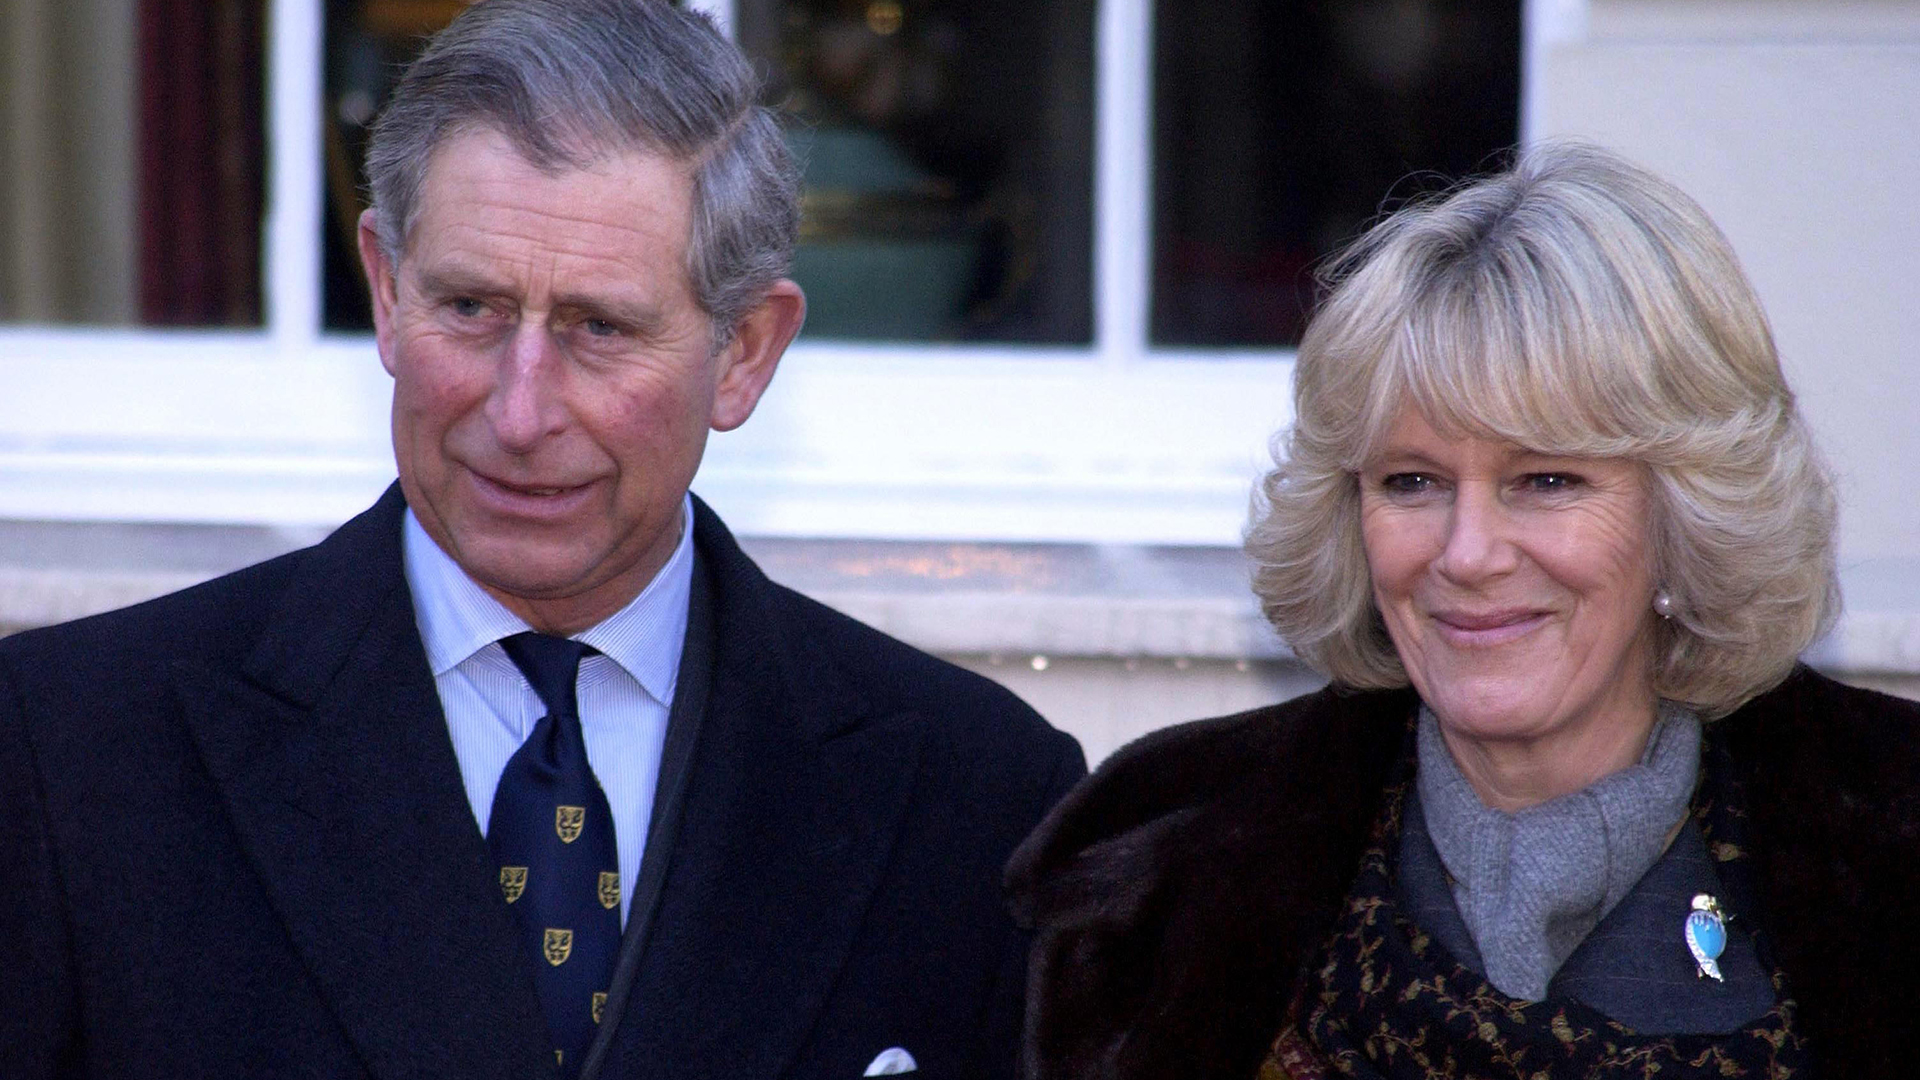 The Real Reason Prince Charles Couldn't Marry Camilla